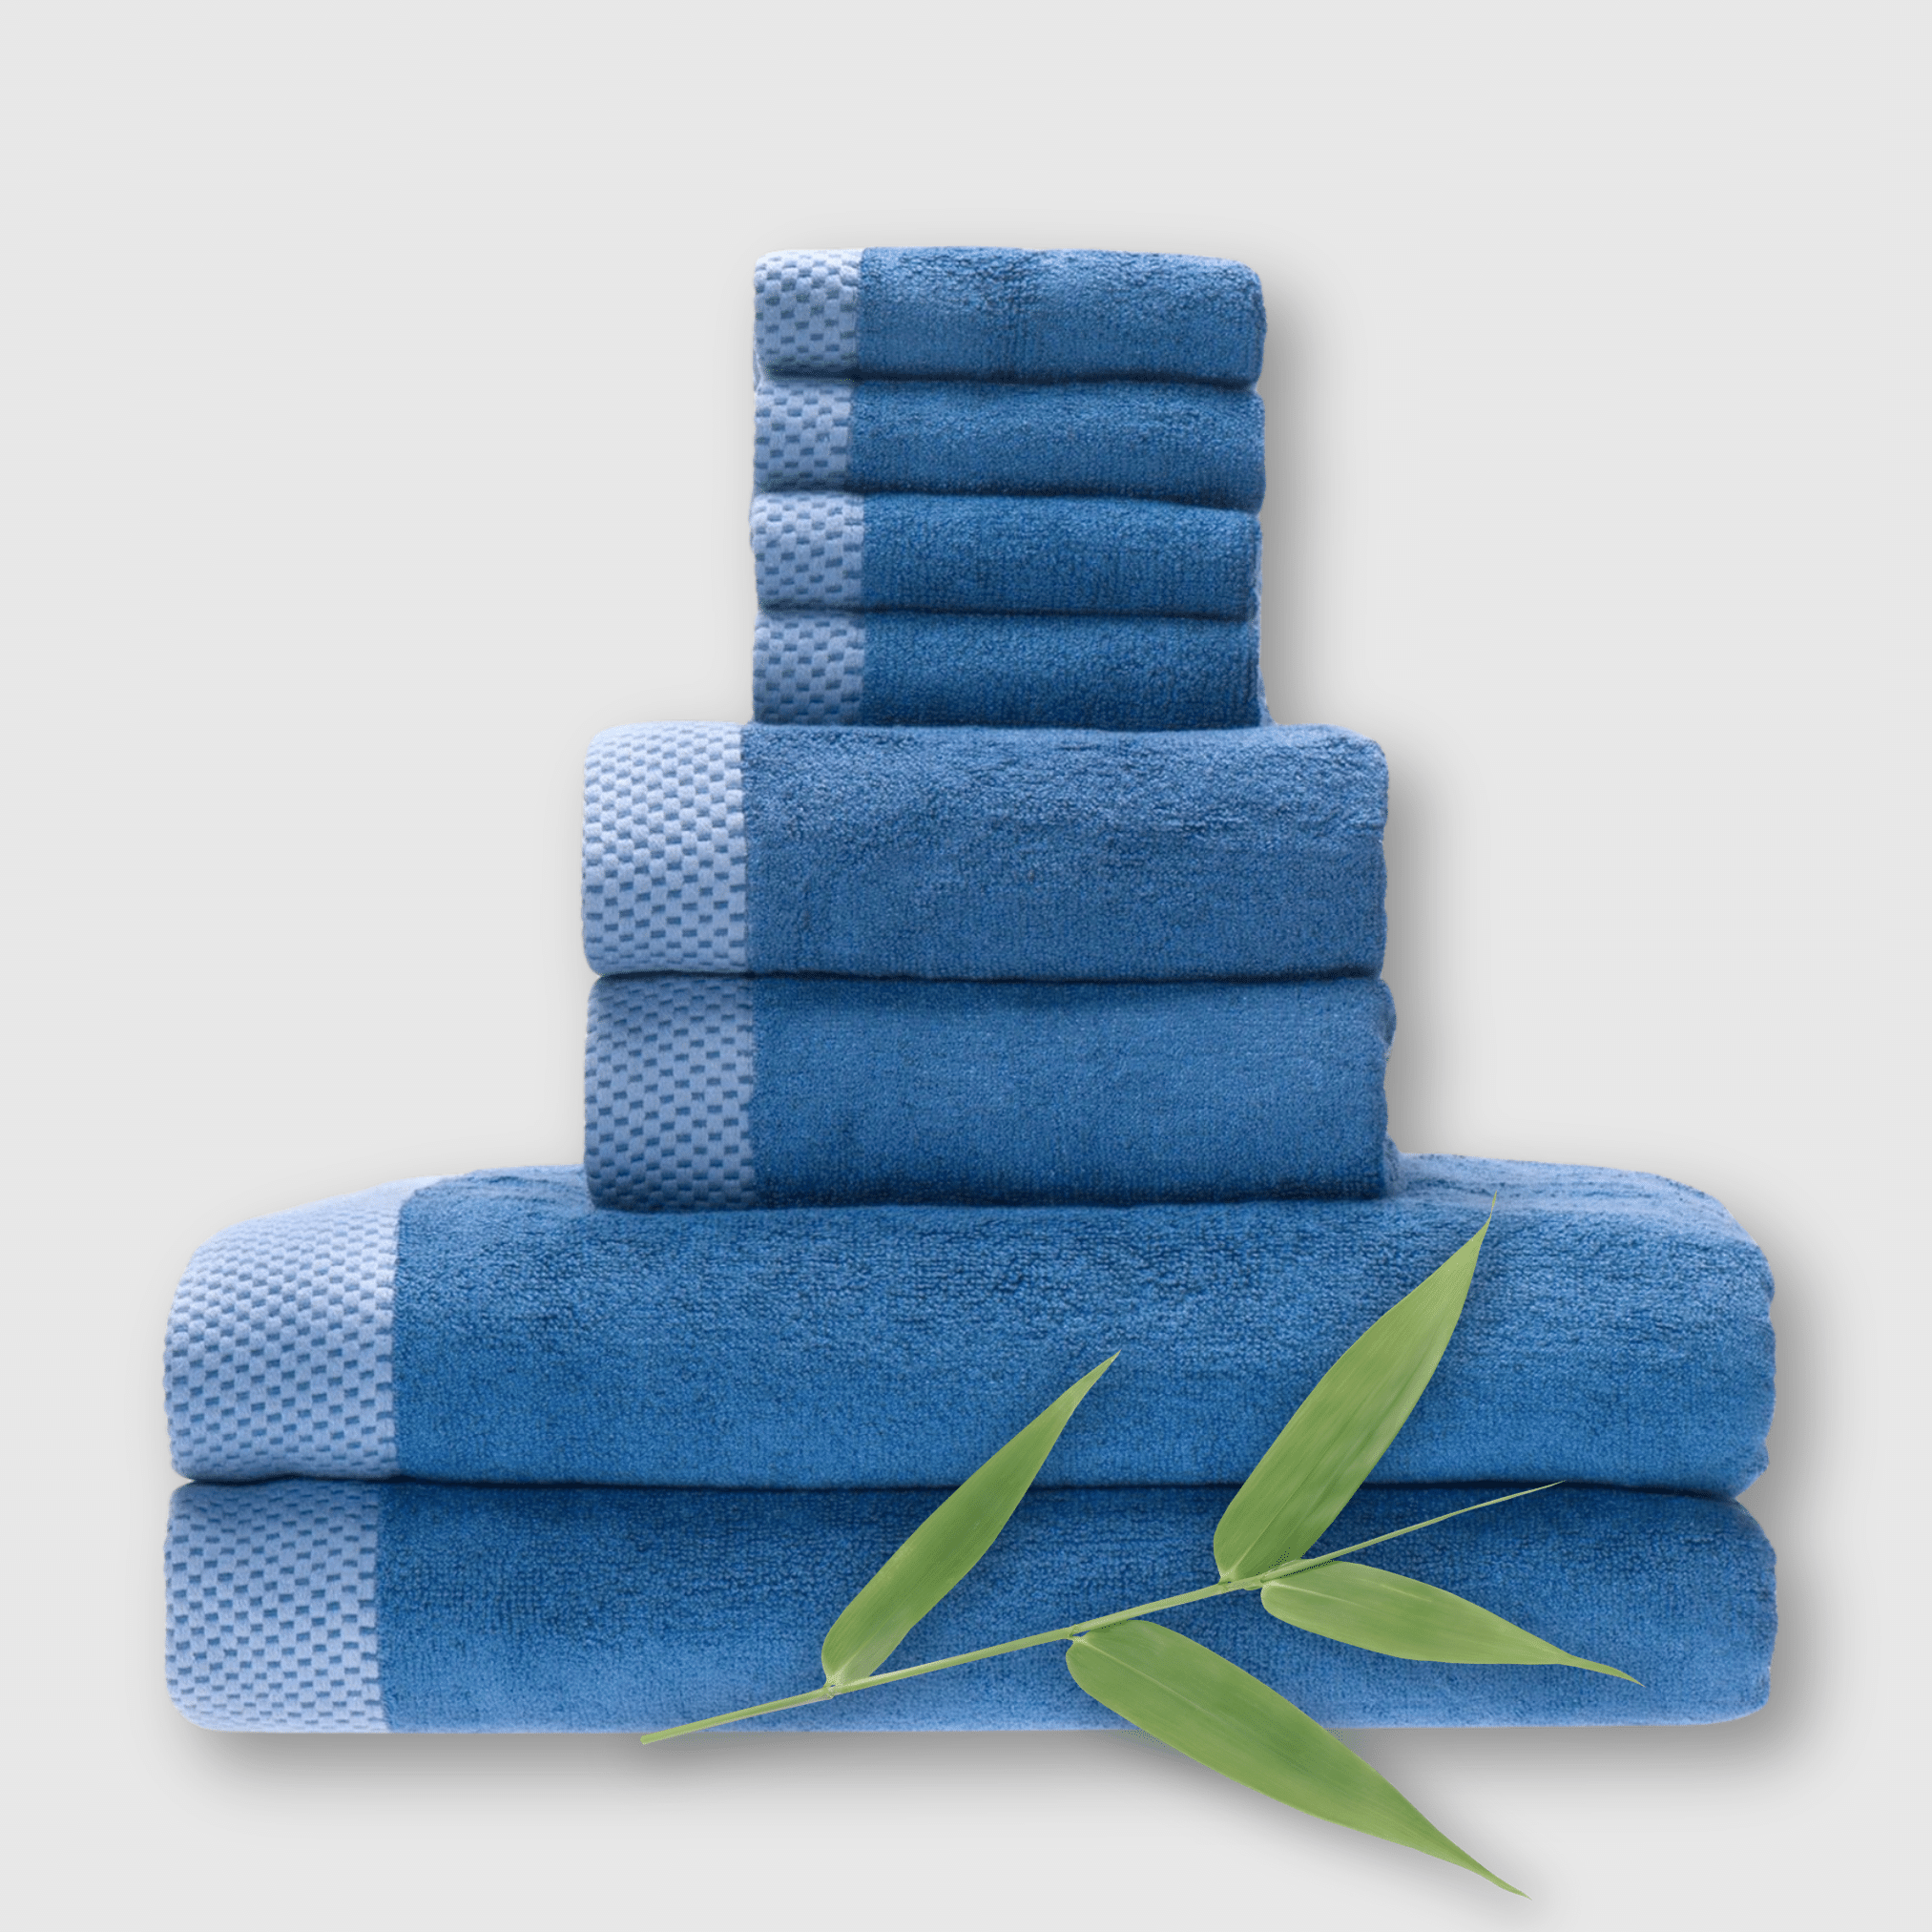 8 piece dark blue indigo bamboo towel stack showing basket weave edge and a bamboo plant